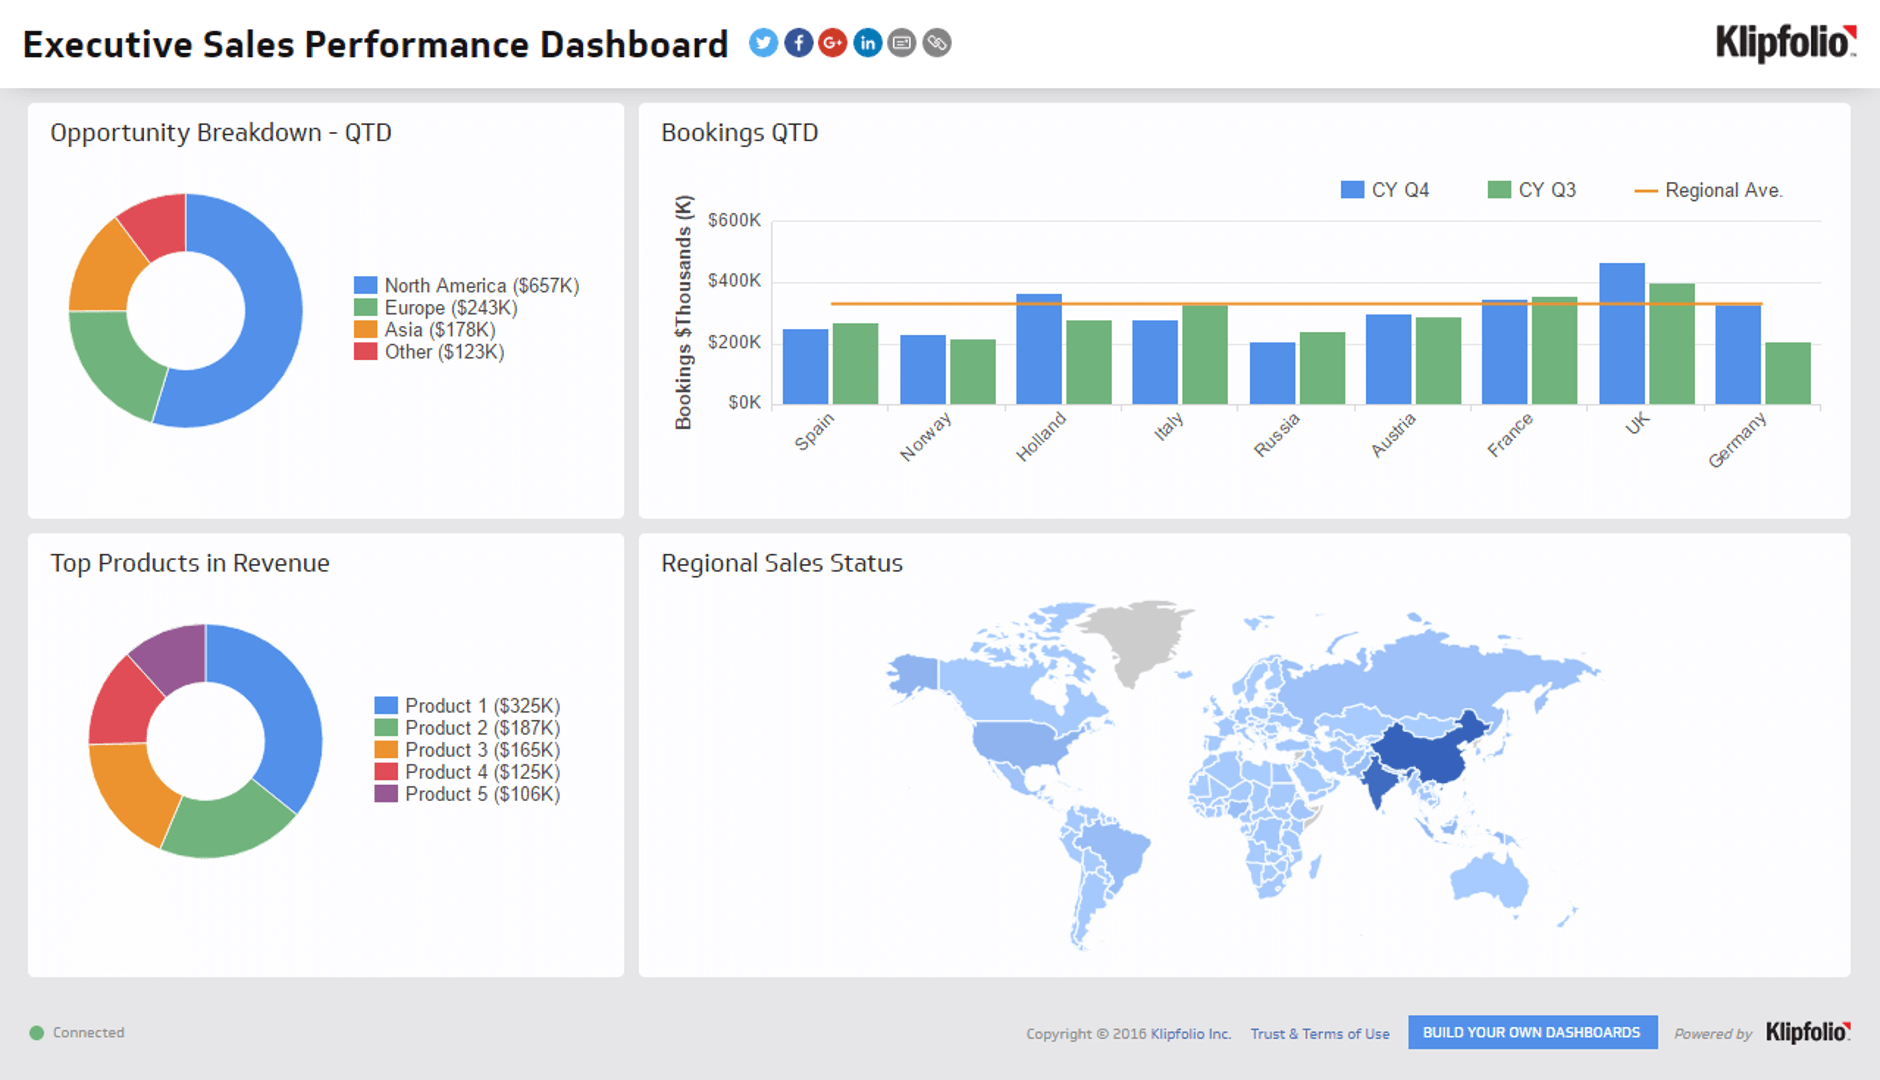 Related Dashboard Examples - Sales Performance Dashboard